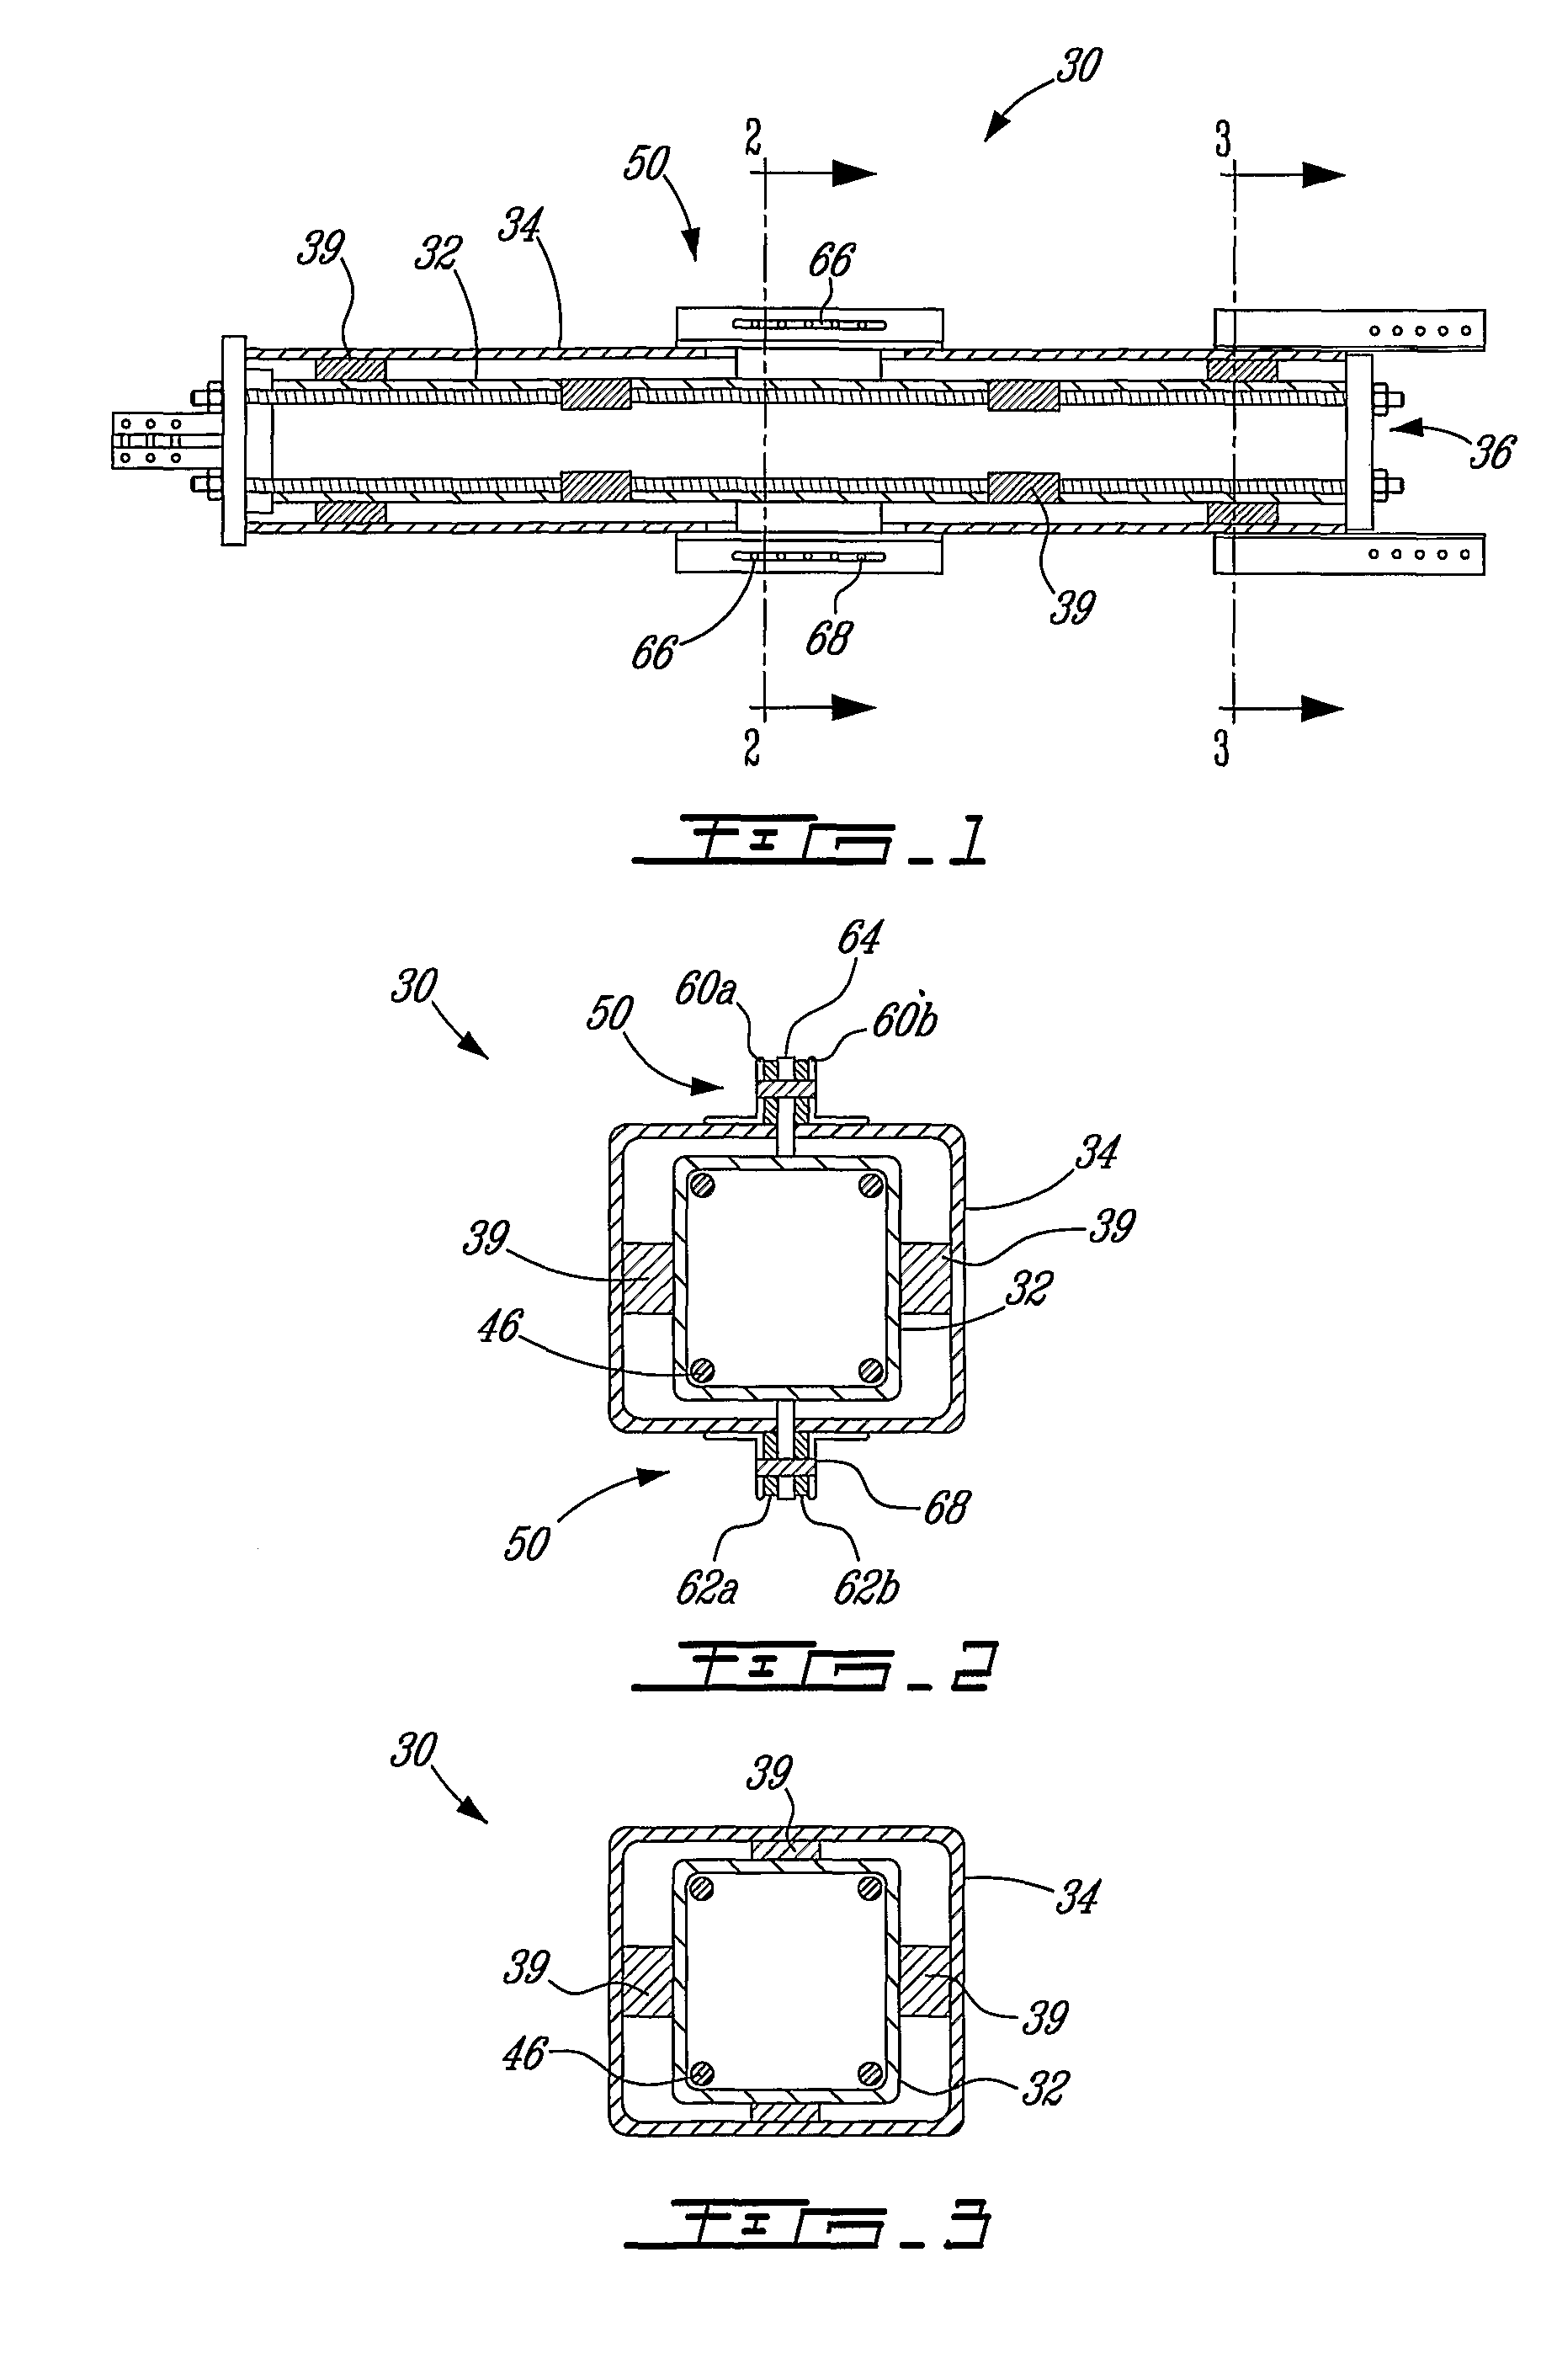 Self-centering energy dissipative brace apparatus with tensioning elements